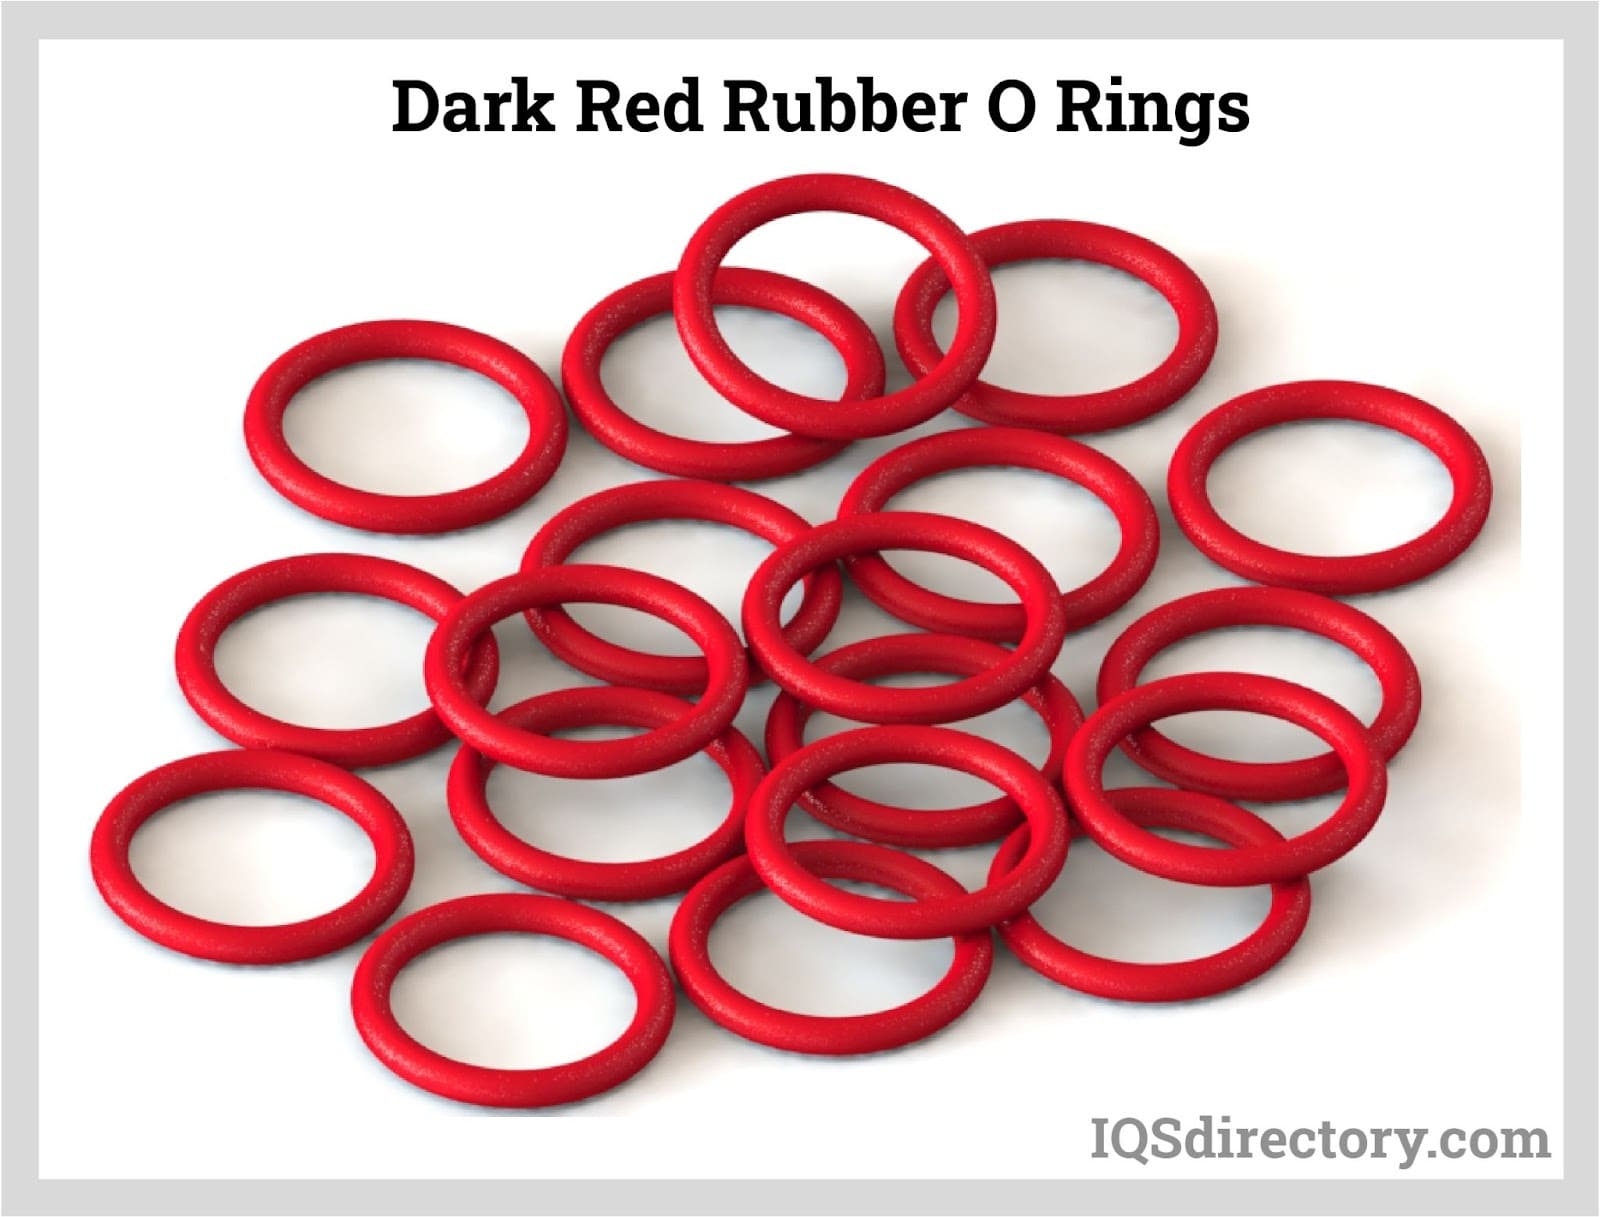 What is the best 'O' ring material?